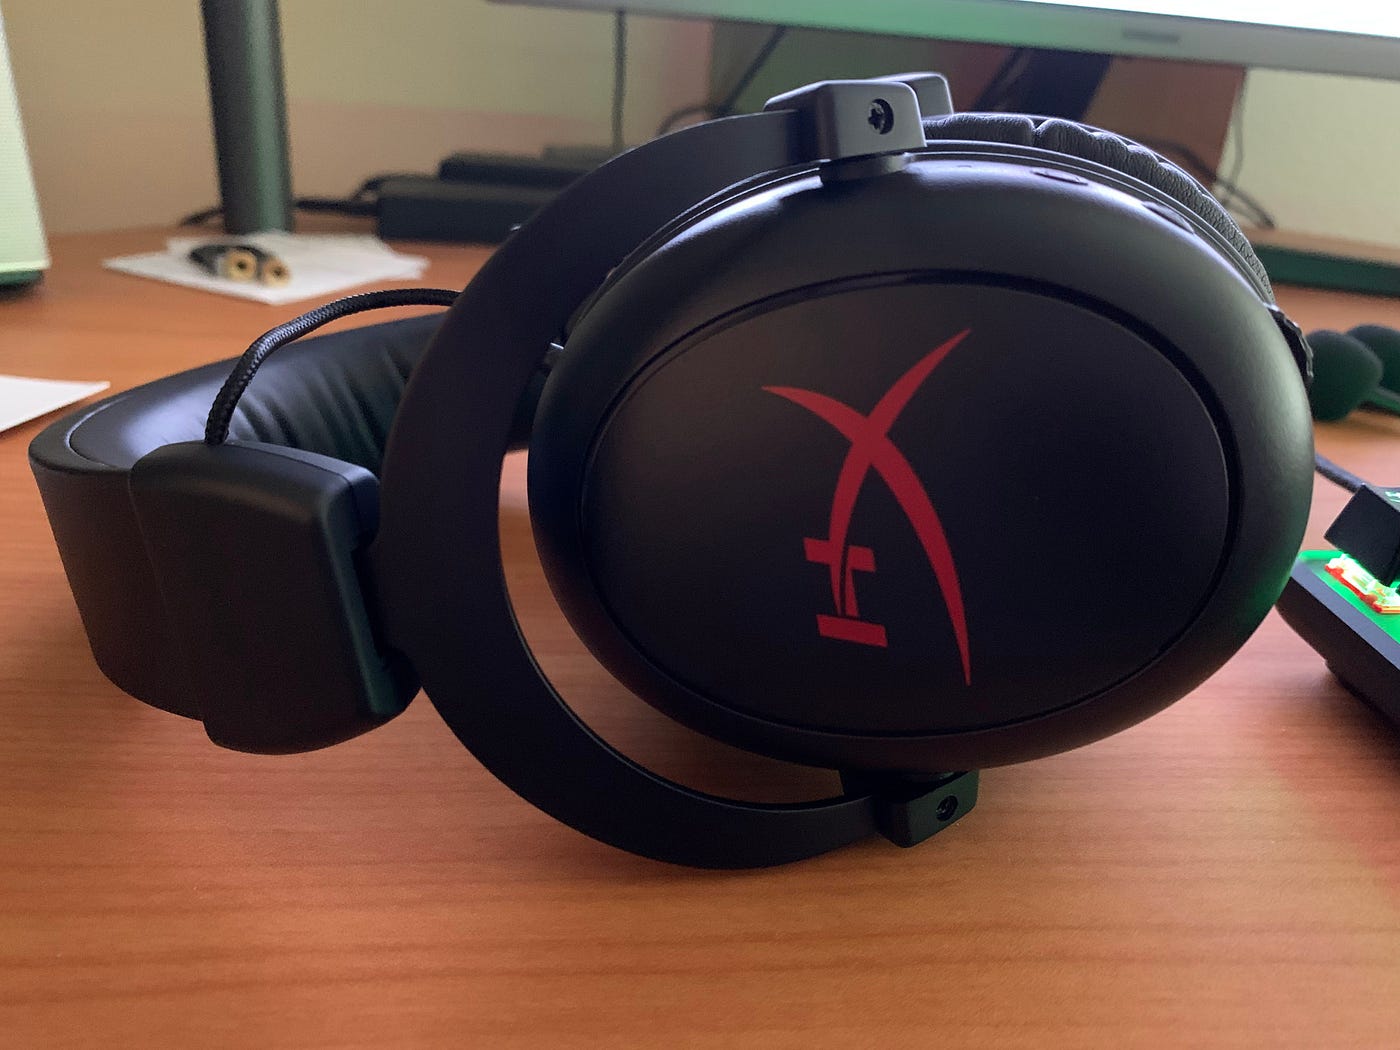 Steelseries Arctis 7 Wireless Gaming Headset Review: Master of All Trades?, by Alex Rowe